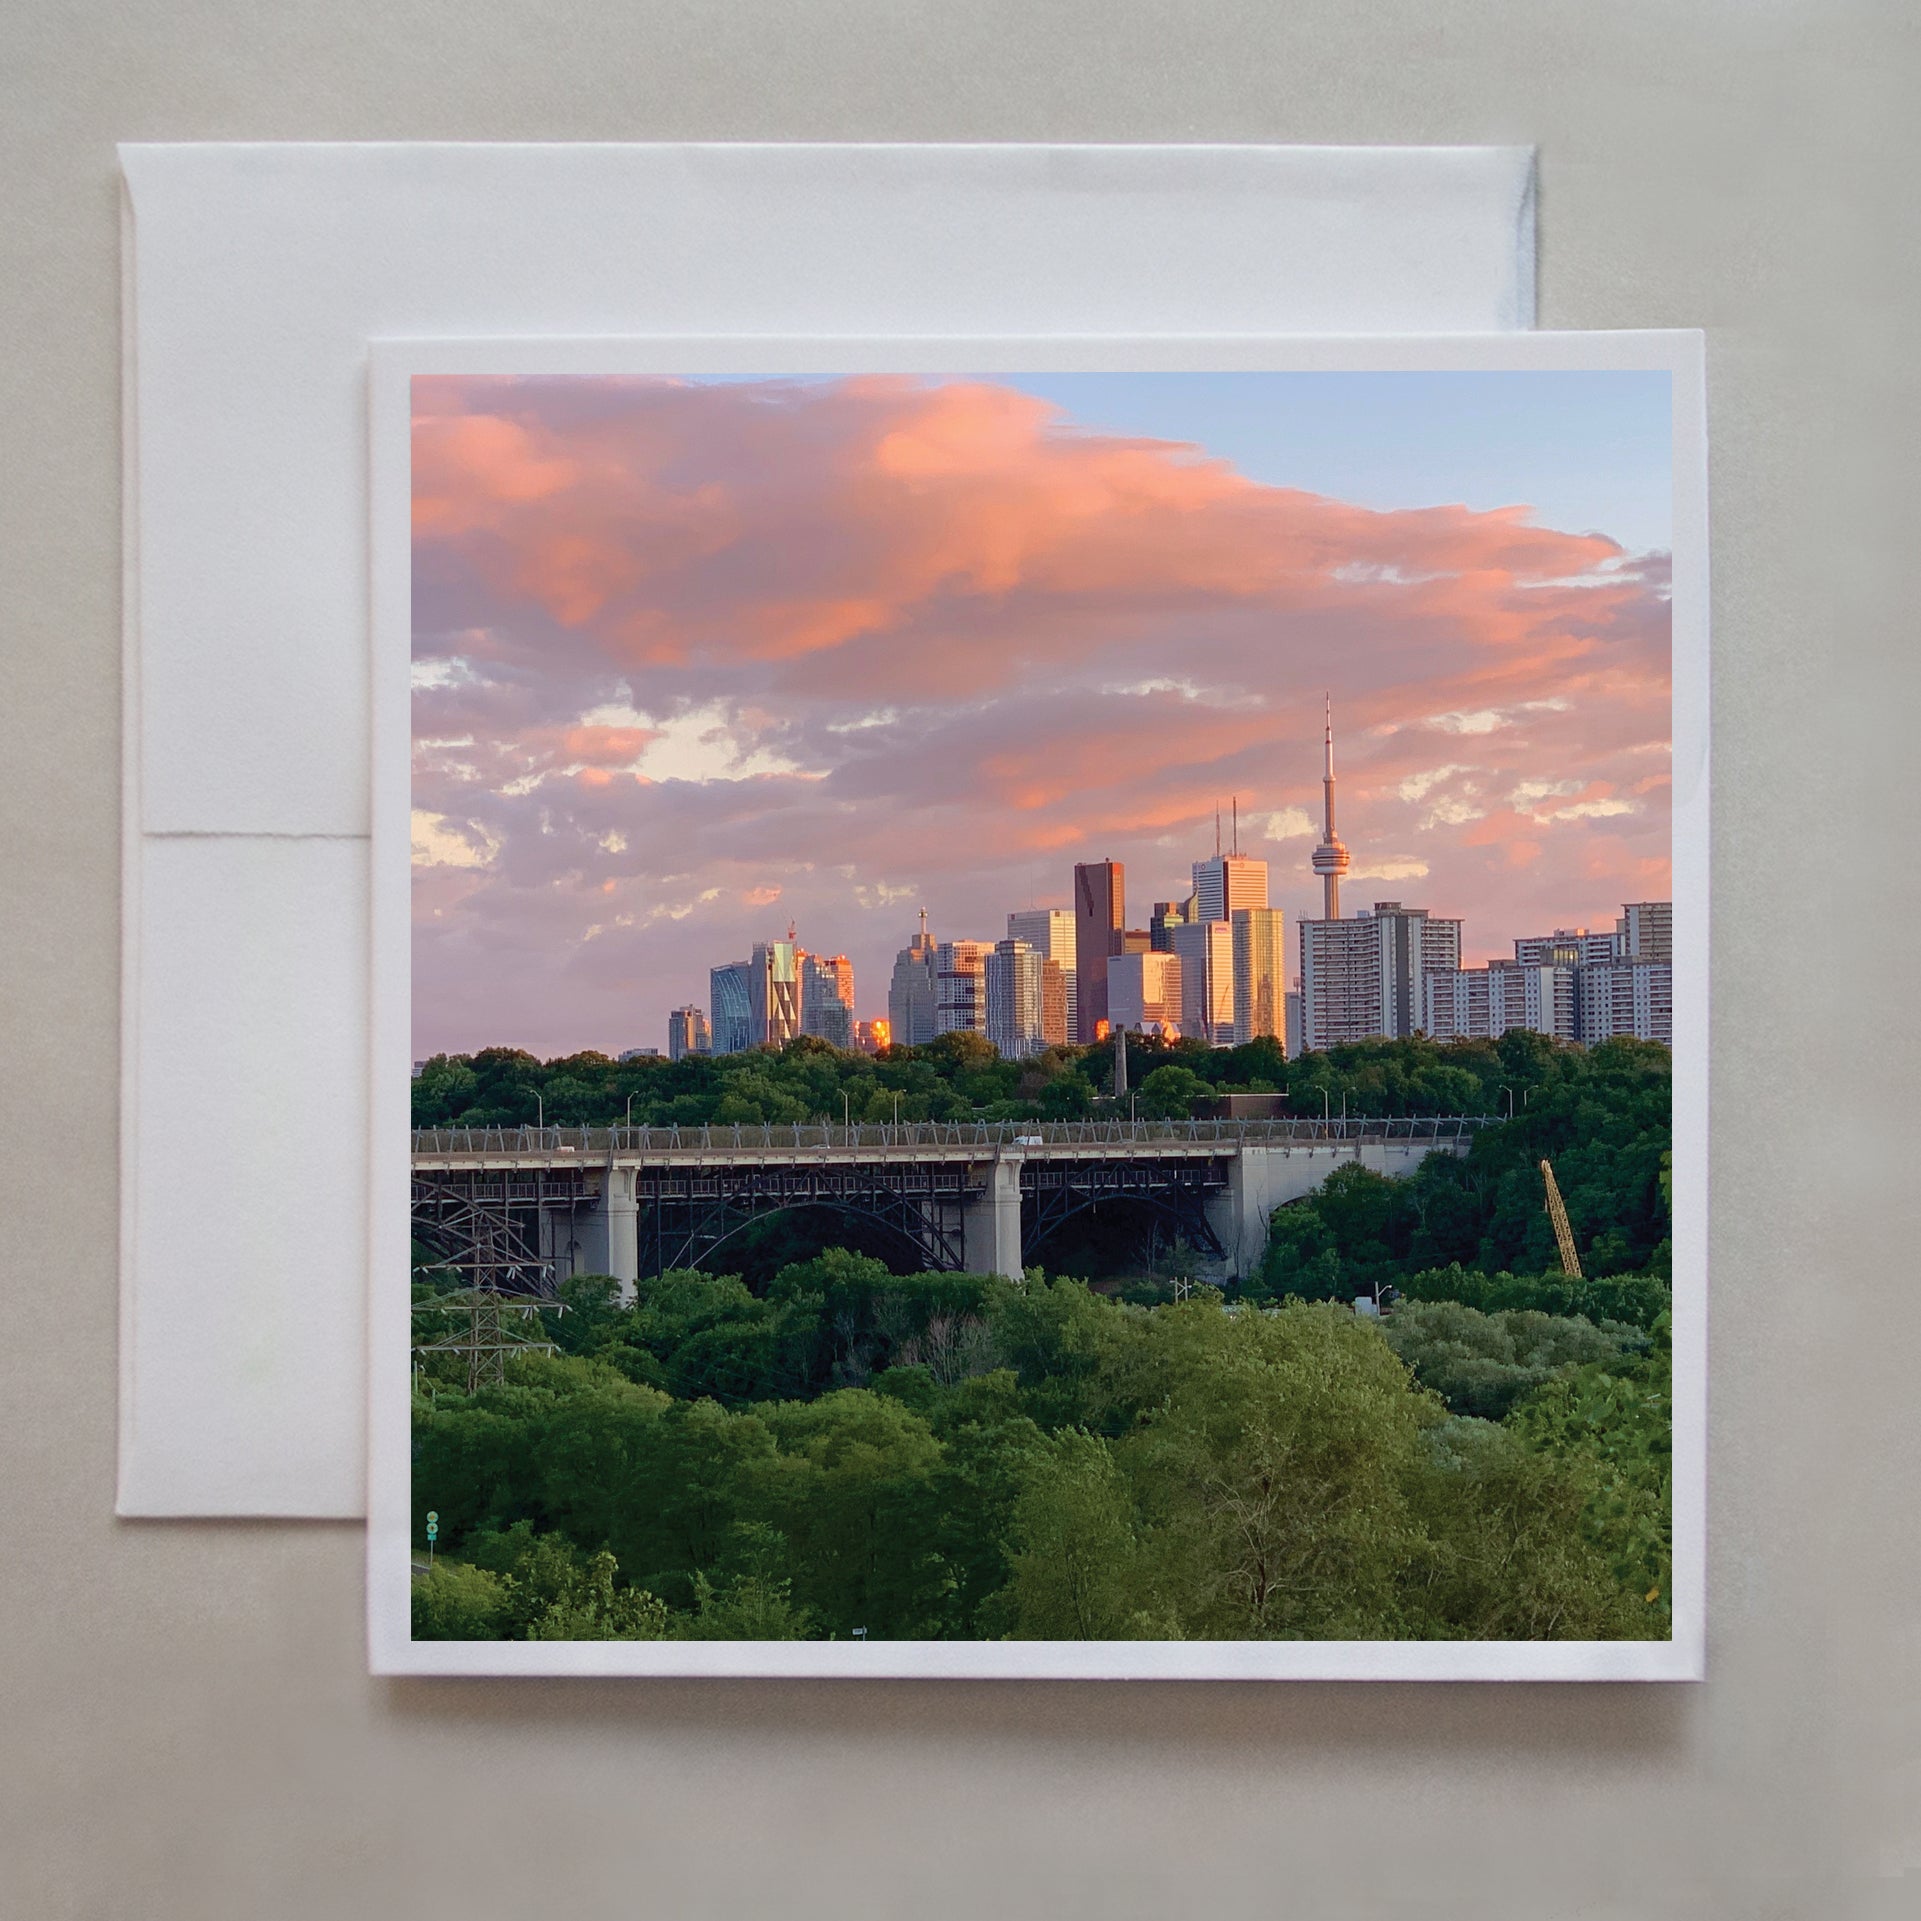 This photo card shows a gorgeous sunset with the Danforth bridge & CN Tower in the background and was photographed at the Chester Hill lookout by Toronto photographer, Caley Taylor.